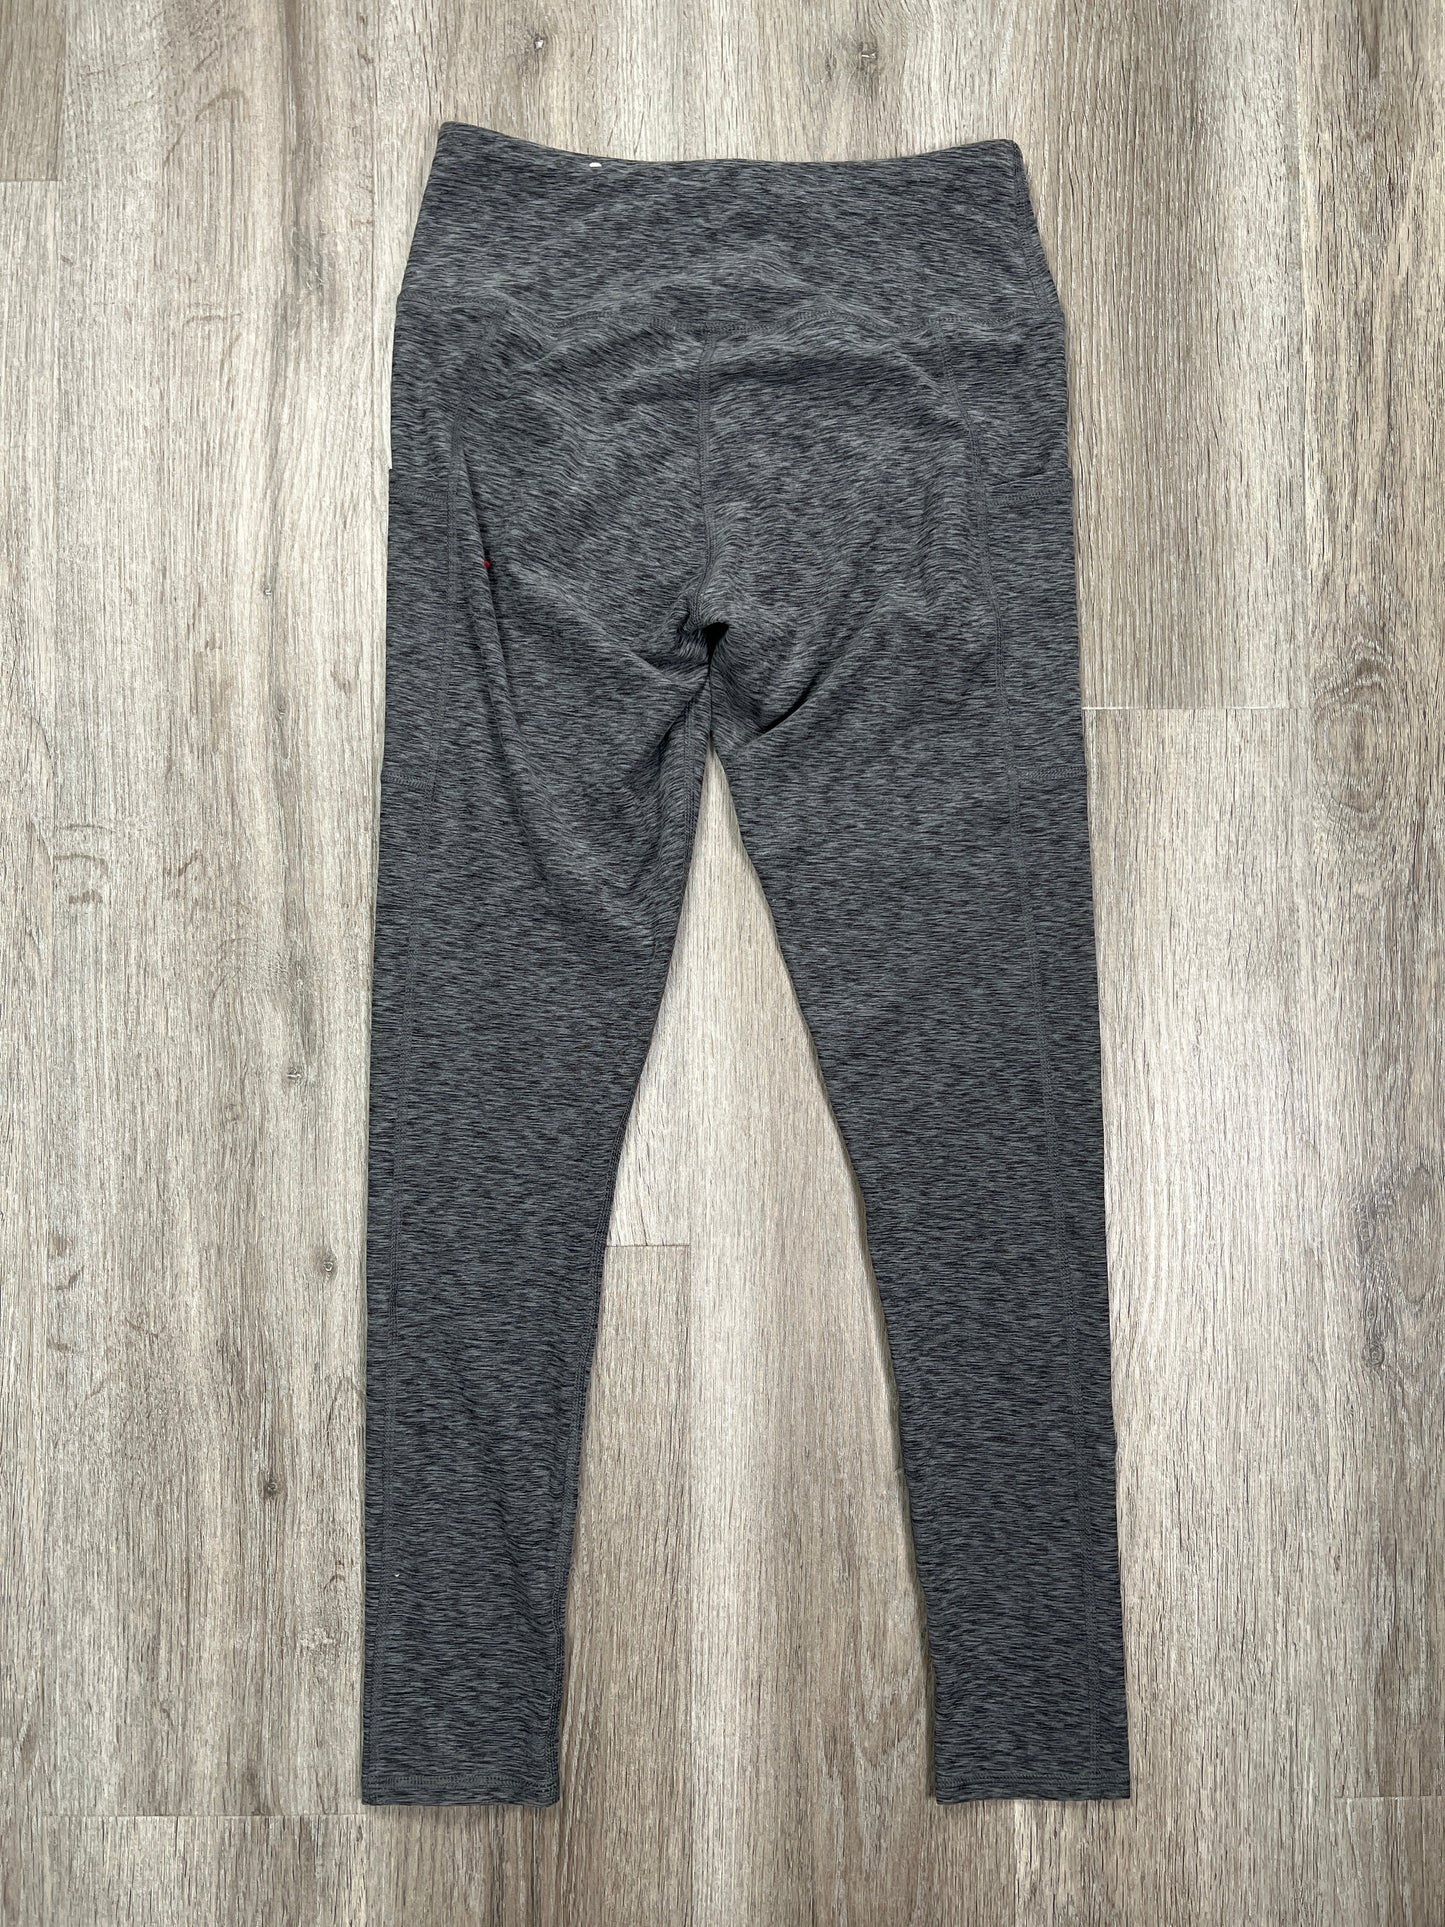 Grey Athletic Leggings Maurices, Size S